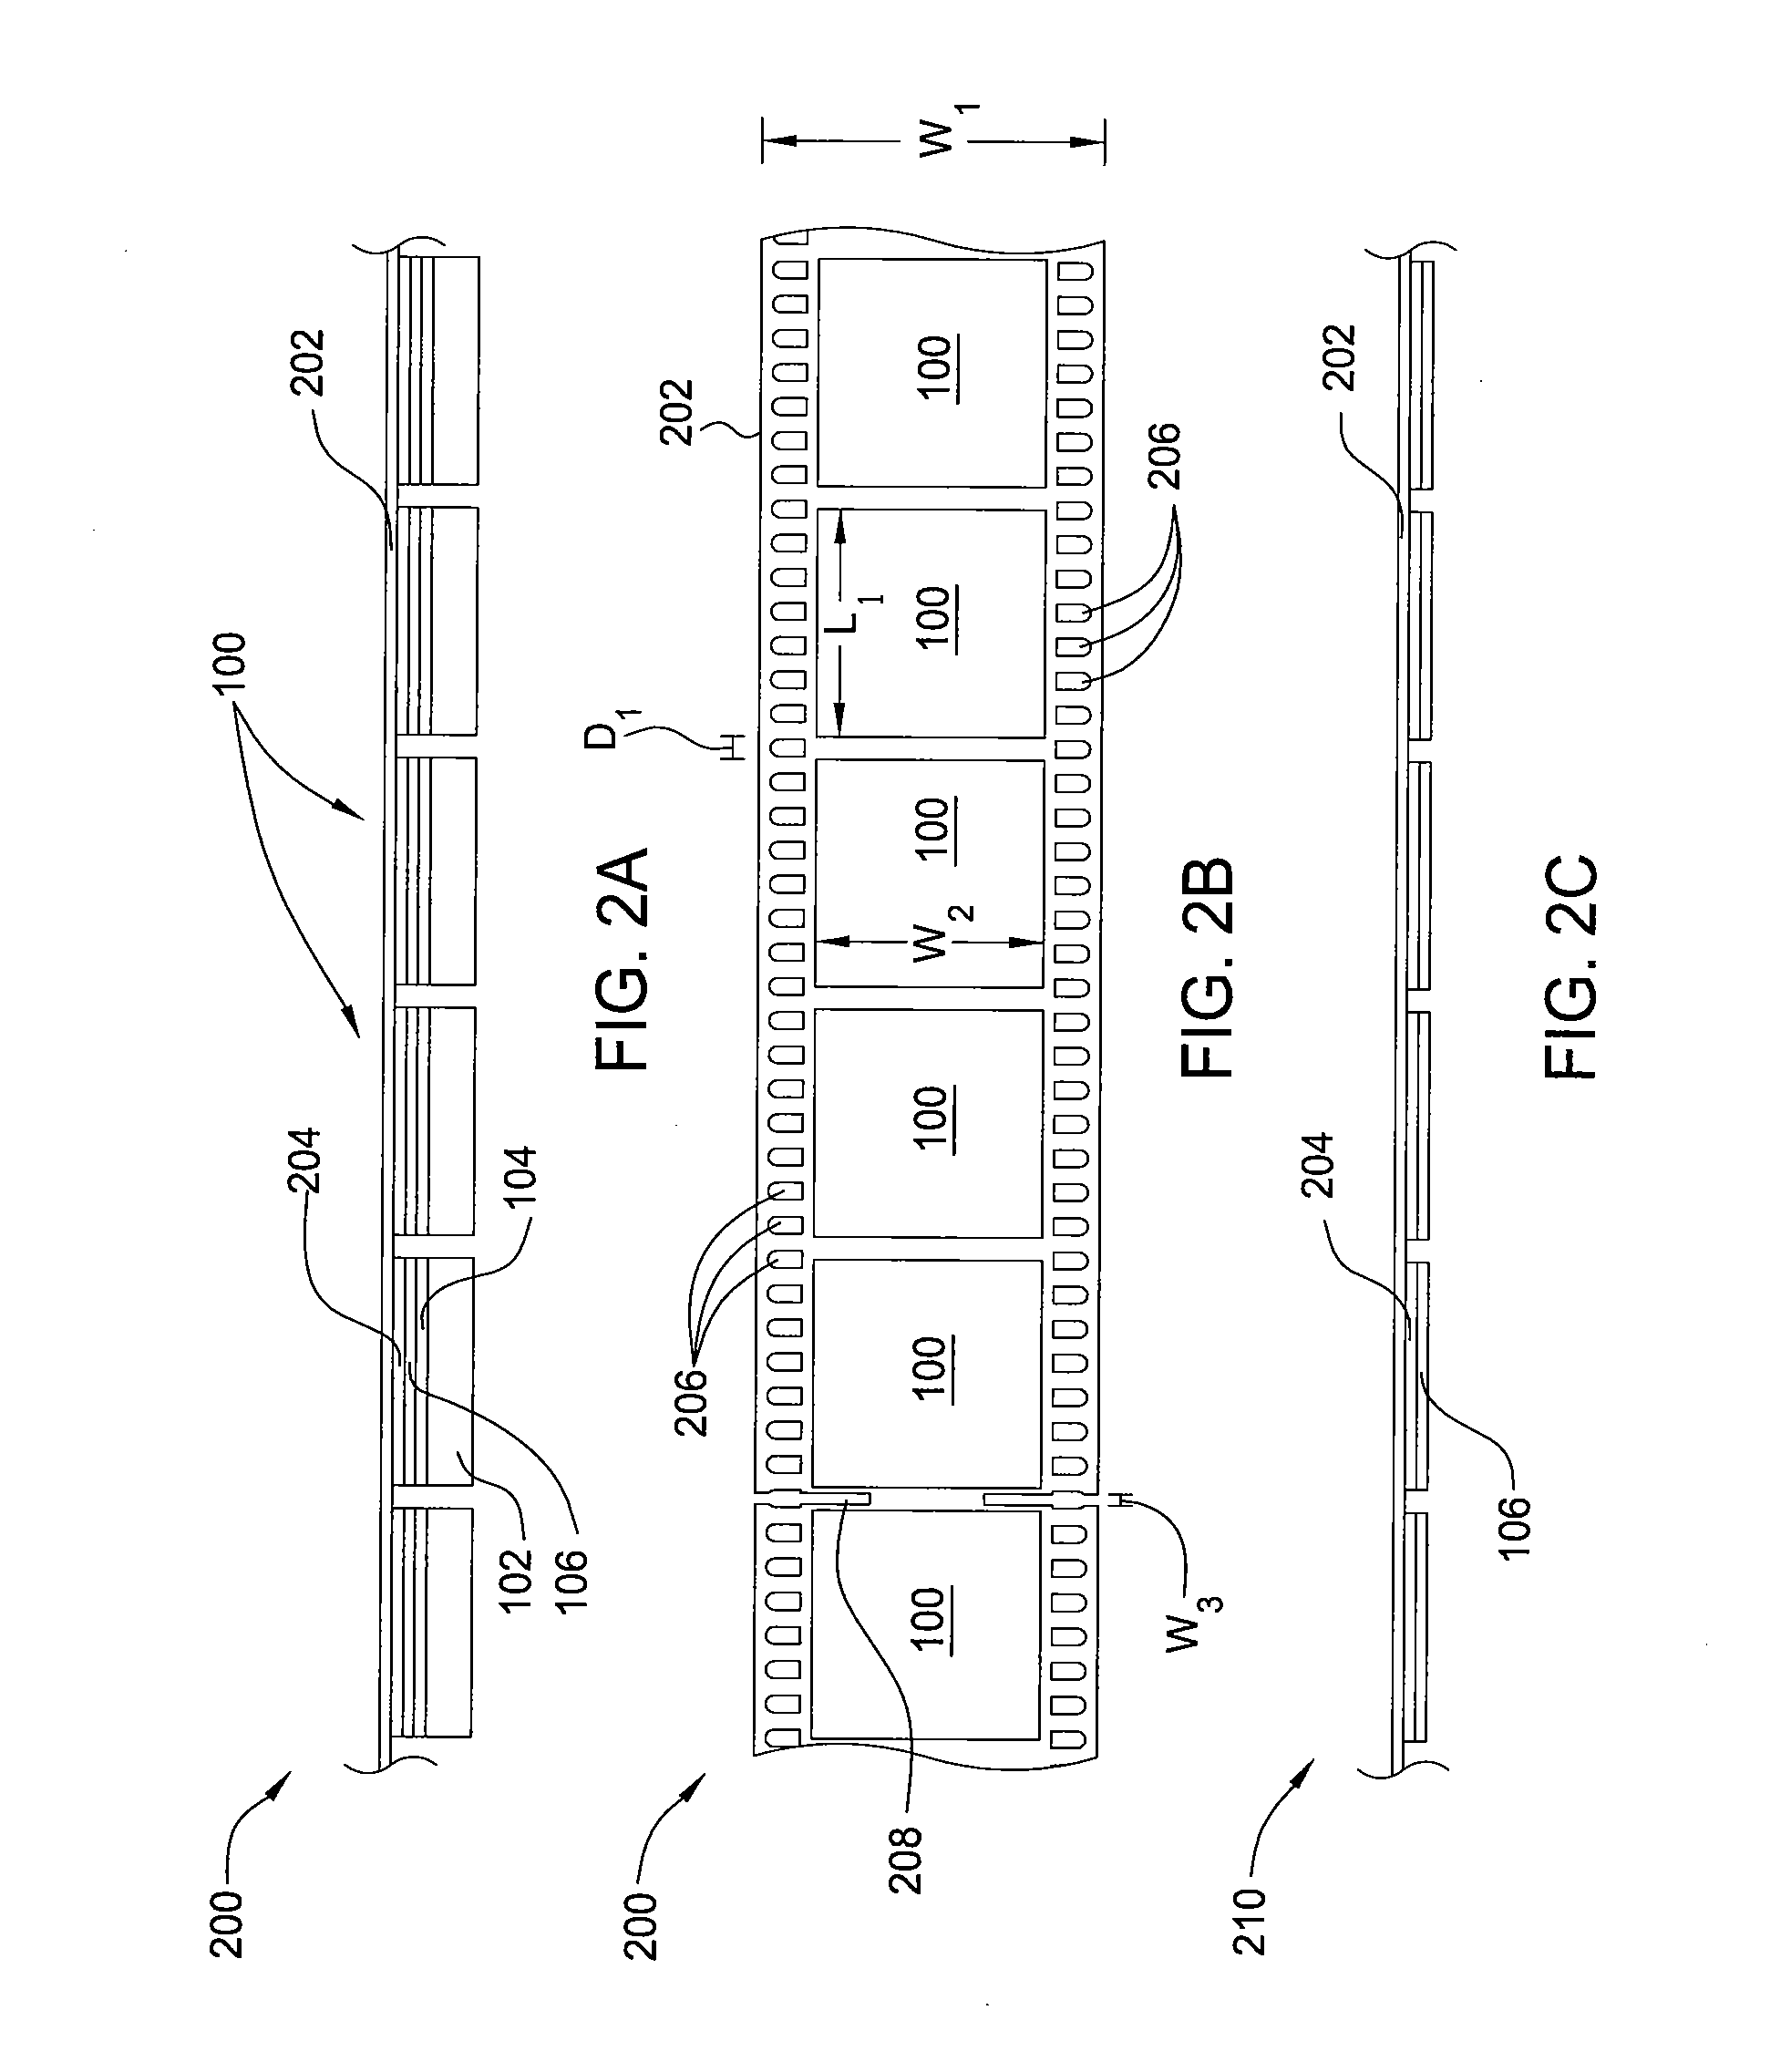 Tape-based epitaxial lift off apparatuses and methods